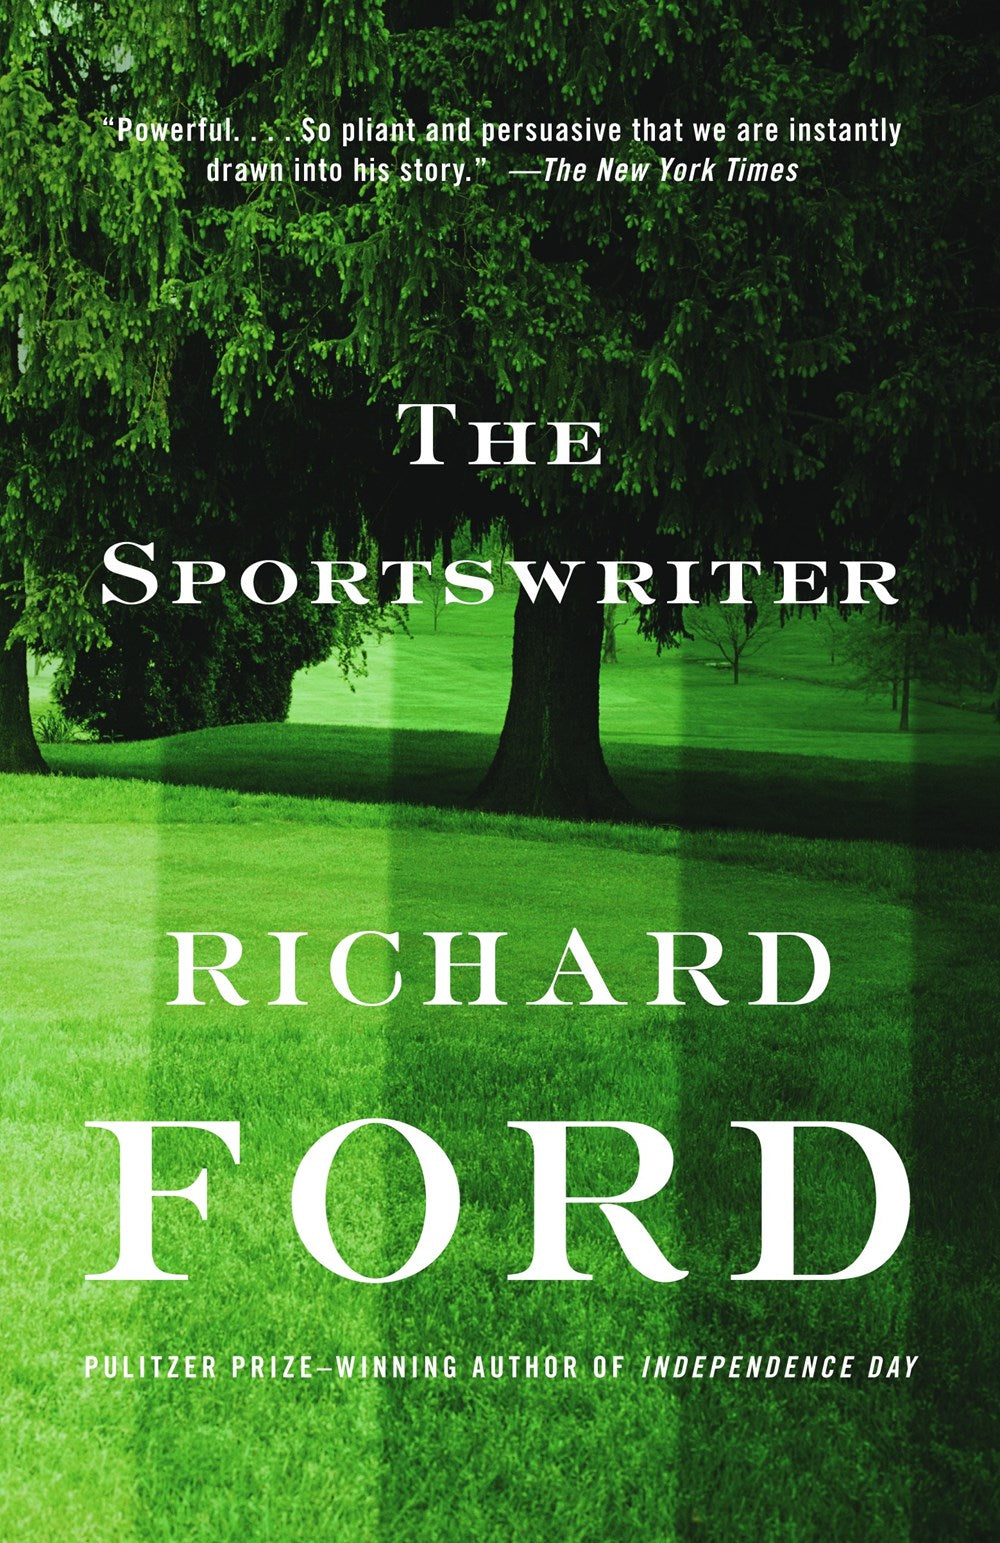 The Sportswriter: A Novel by Richard Ford (Bascombe Trilogy, Book 1)